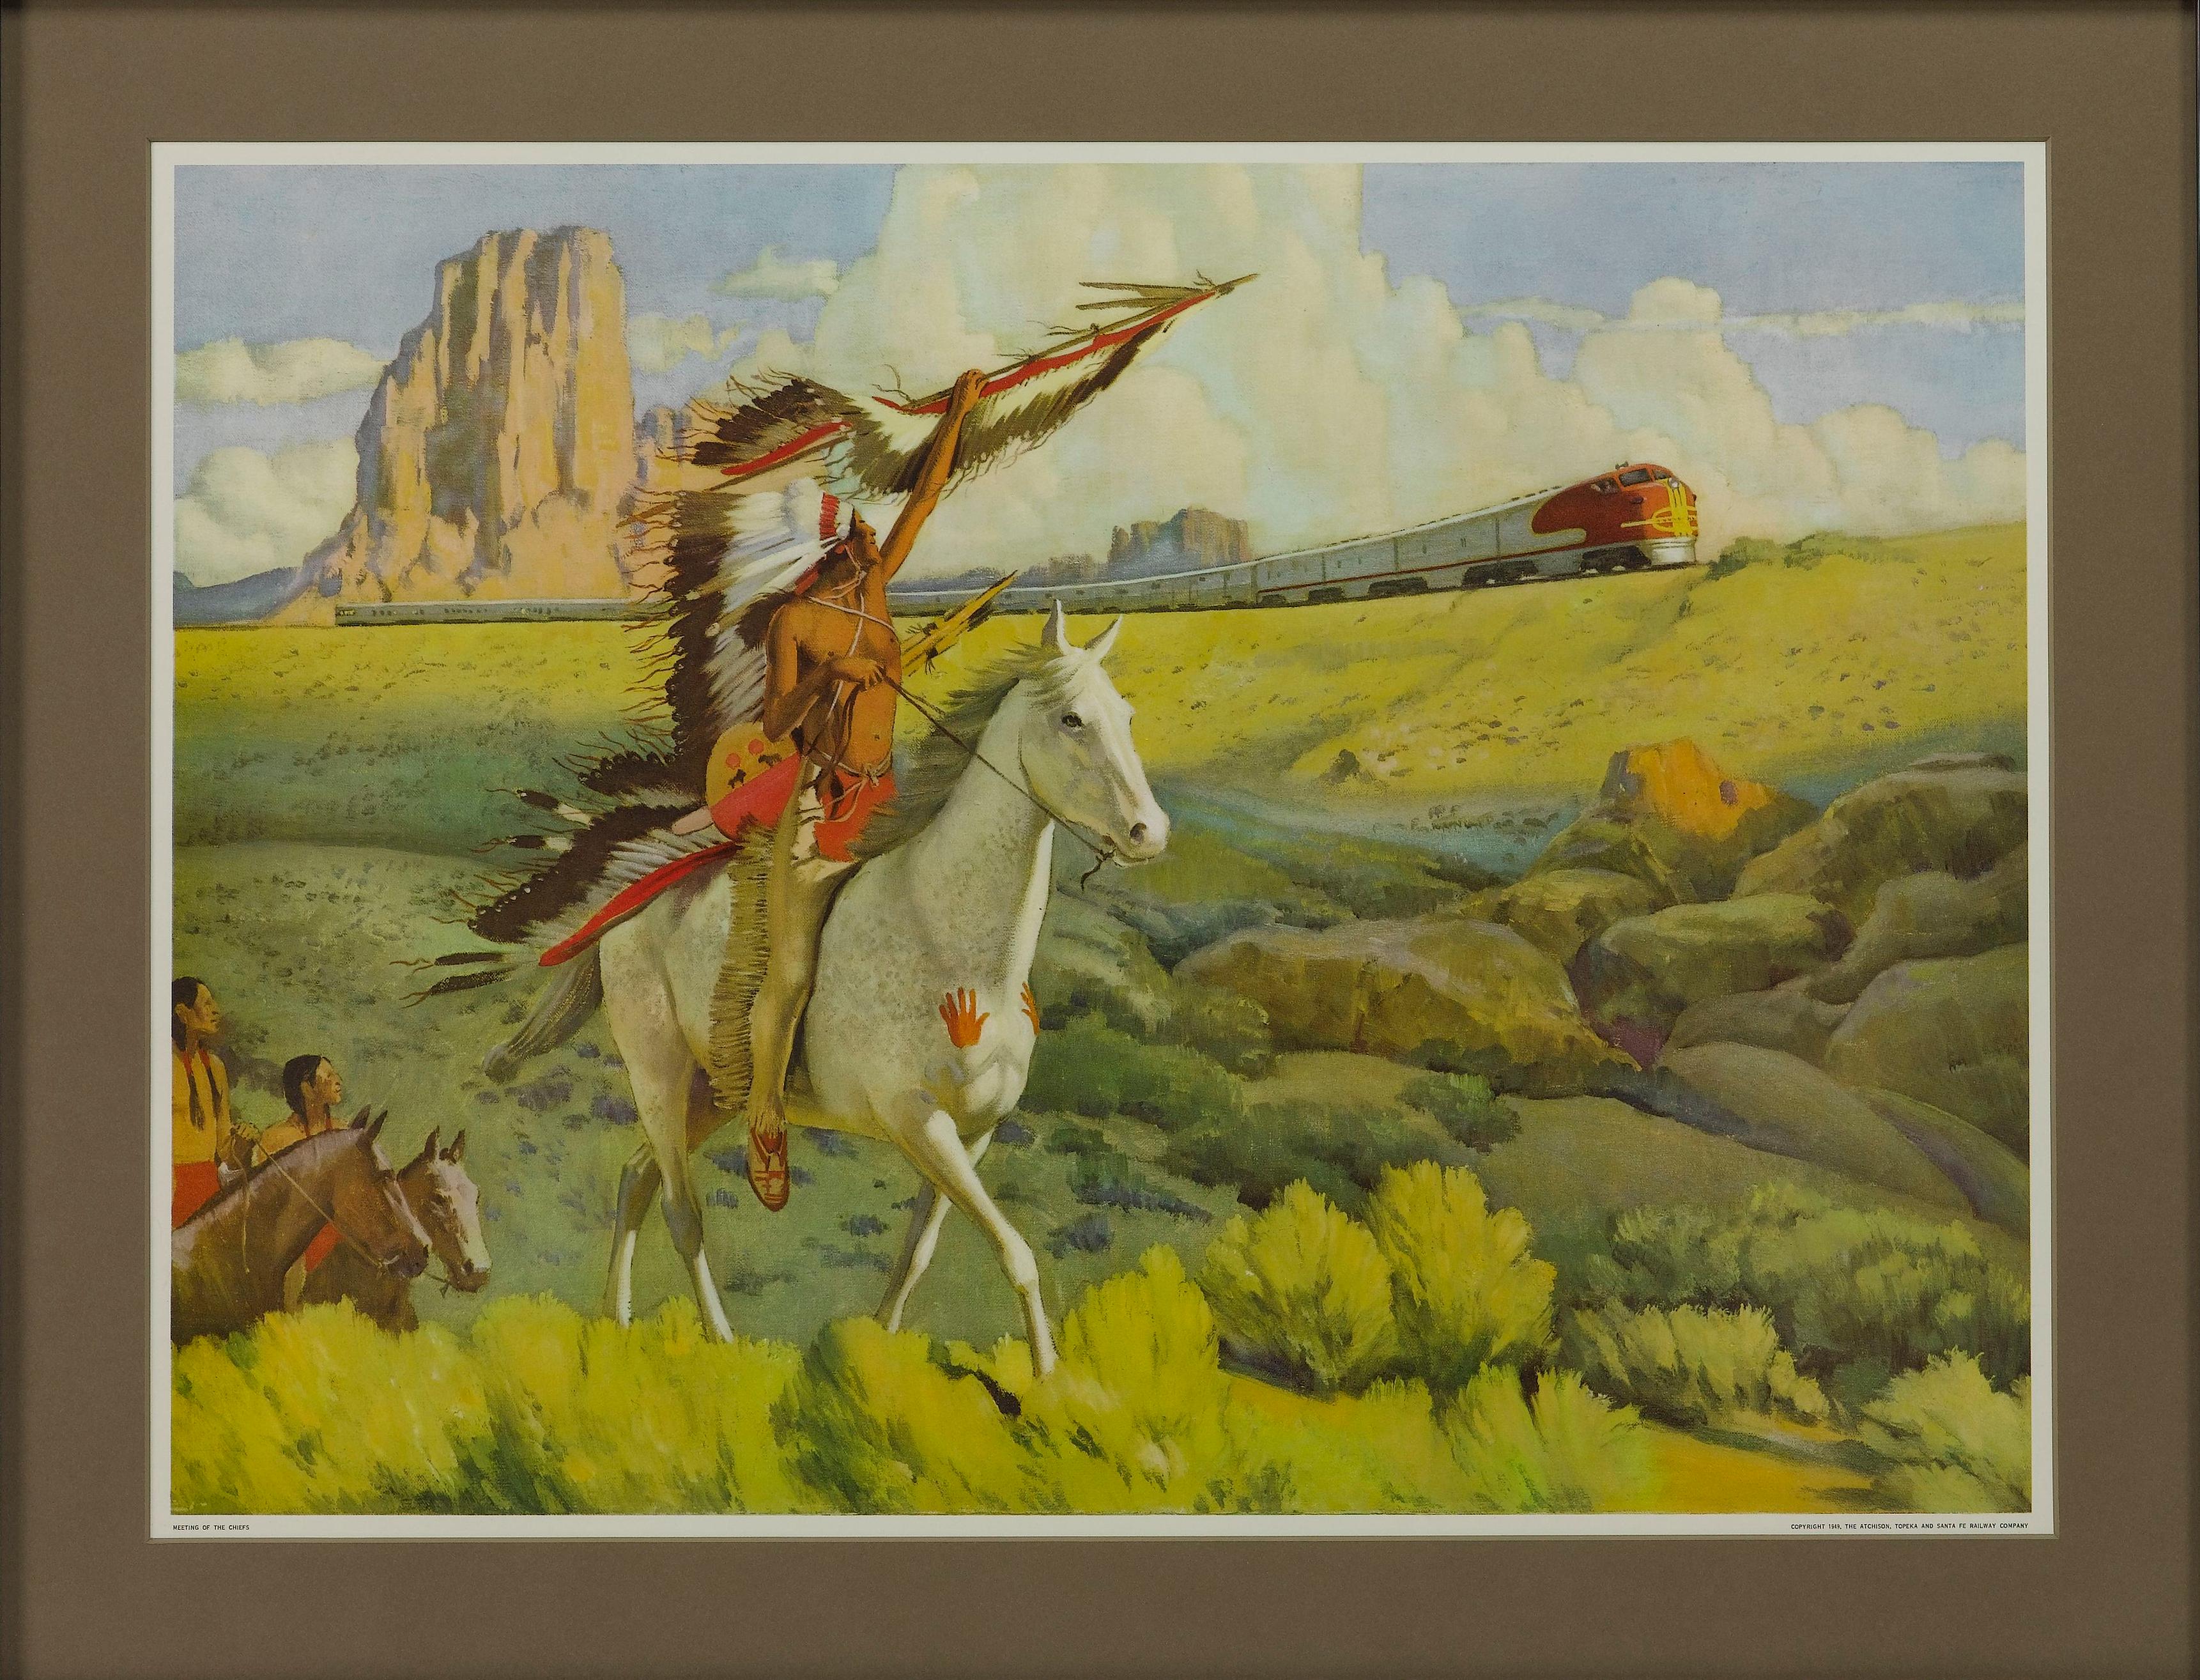 Presented is a vintage poster, titled “Meeting of the Chiefs.” This poster was designed in 1949 by Hernando Gonzalo Villa for the Atchinson, Topeka, and Santa Fe Railway. The poster depicts a Native American chief on horseback, raising his spear to